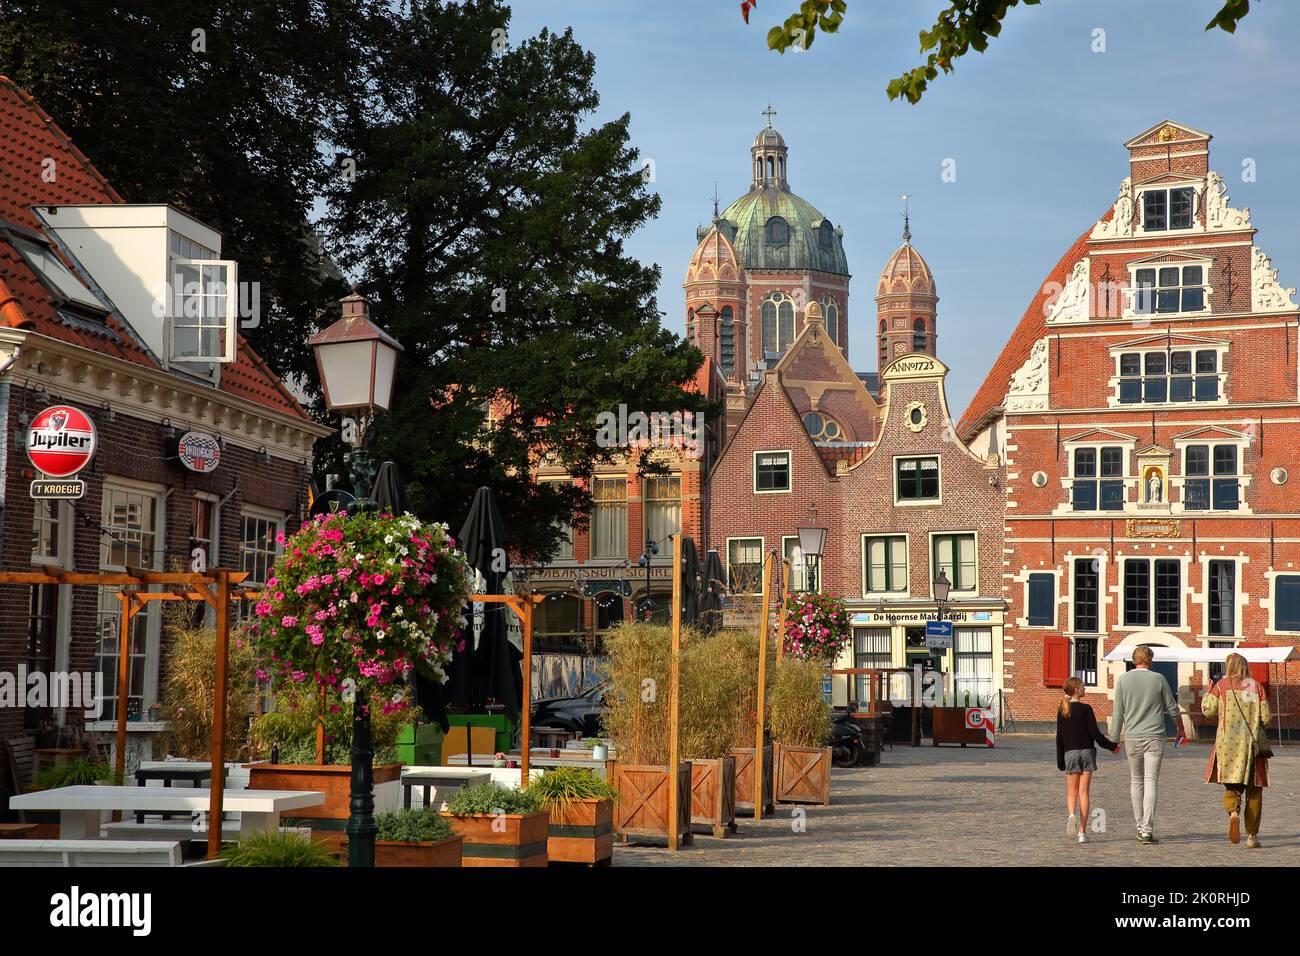 HOORN, NETHERLANDS - SEPTEMBER 4, 2022: The colorful facades of historic houses located along Kerkstraat street in the city center of Hoorn Stock Photo